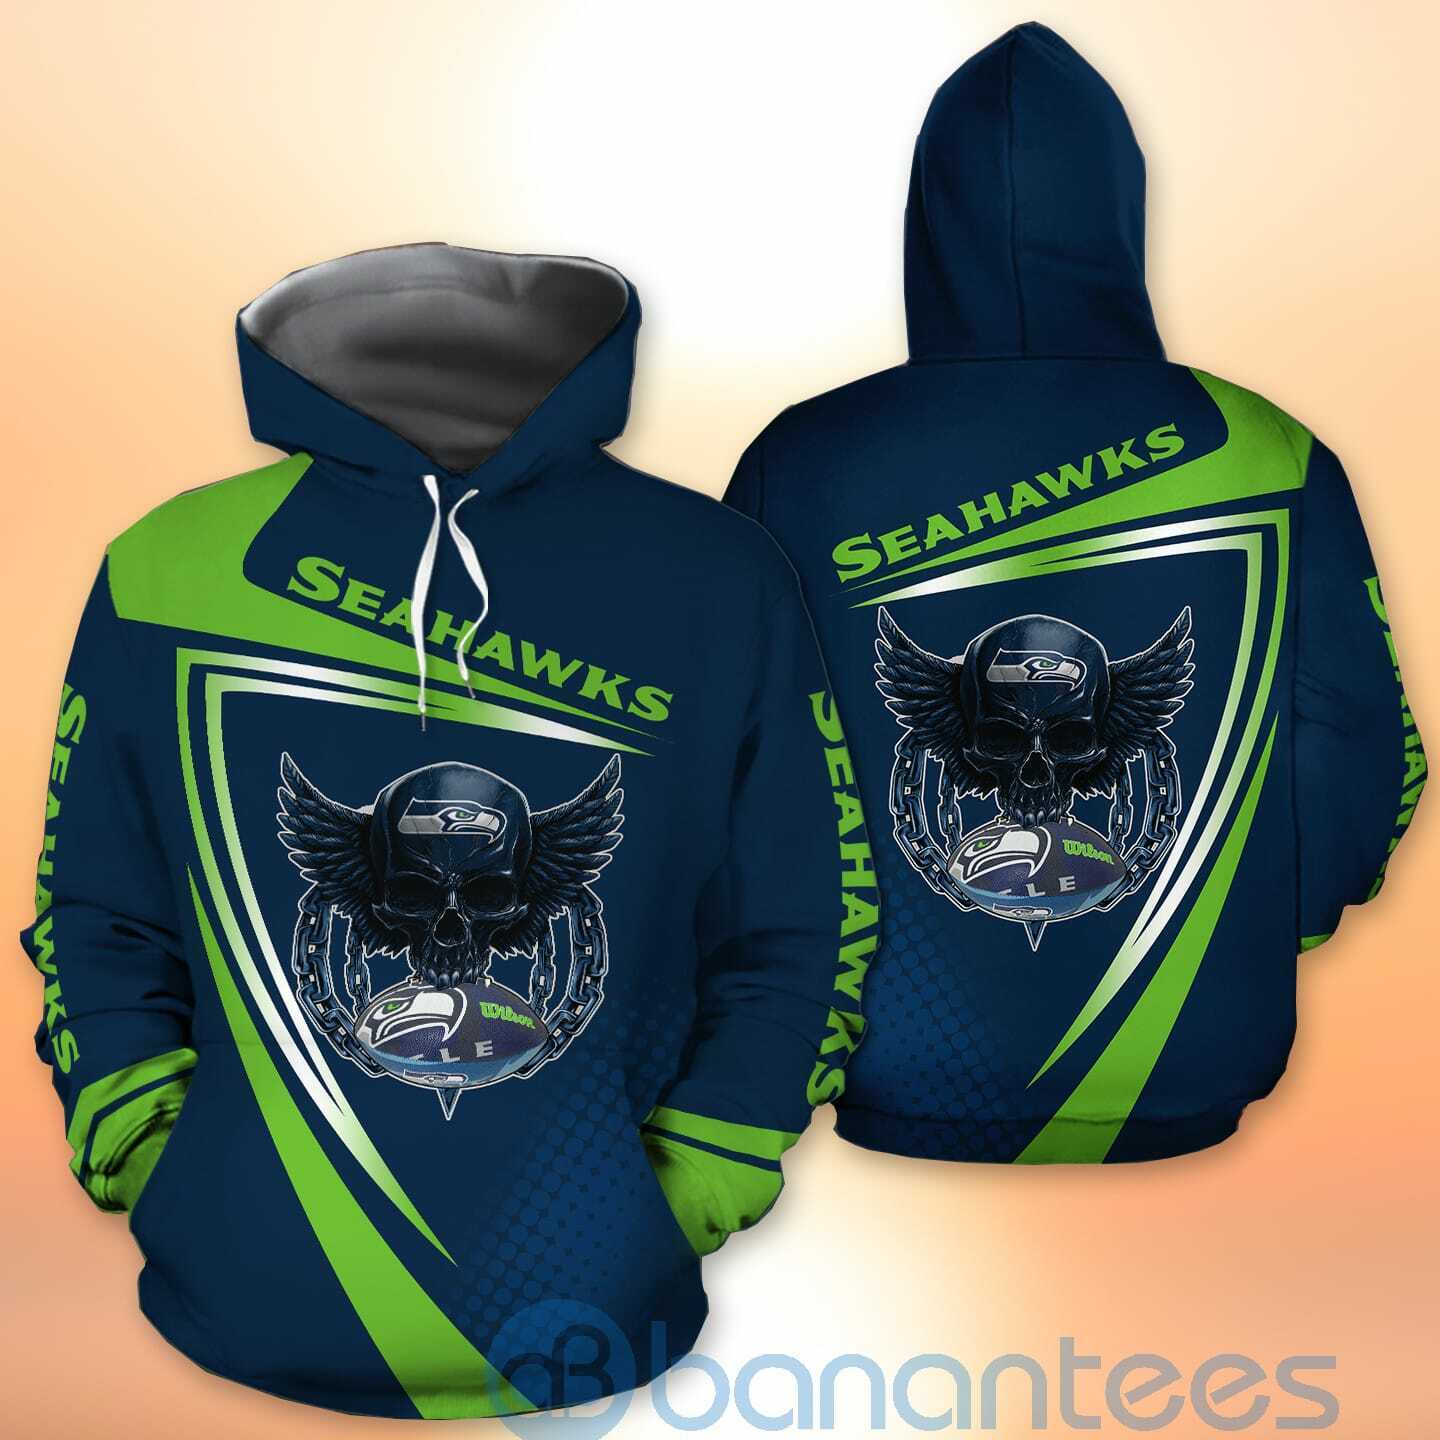 Seattle Seahawks NFL Skull American Football Sporty Design 3D All Over Printed Shirt